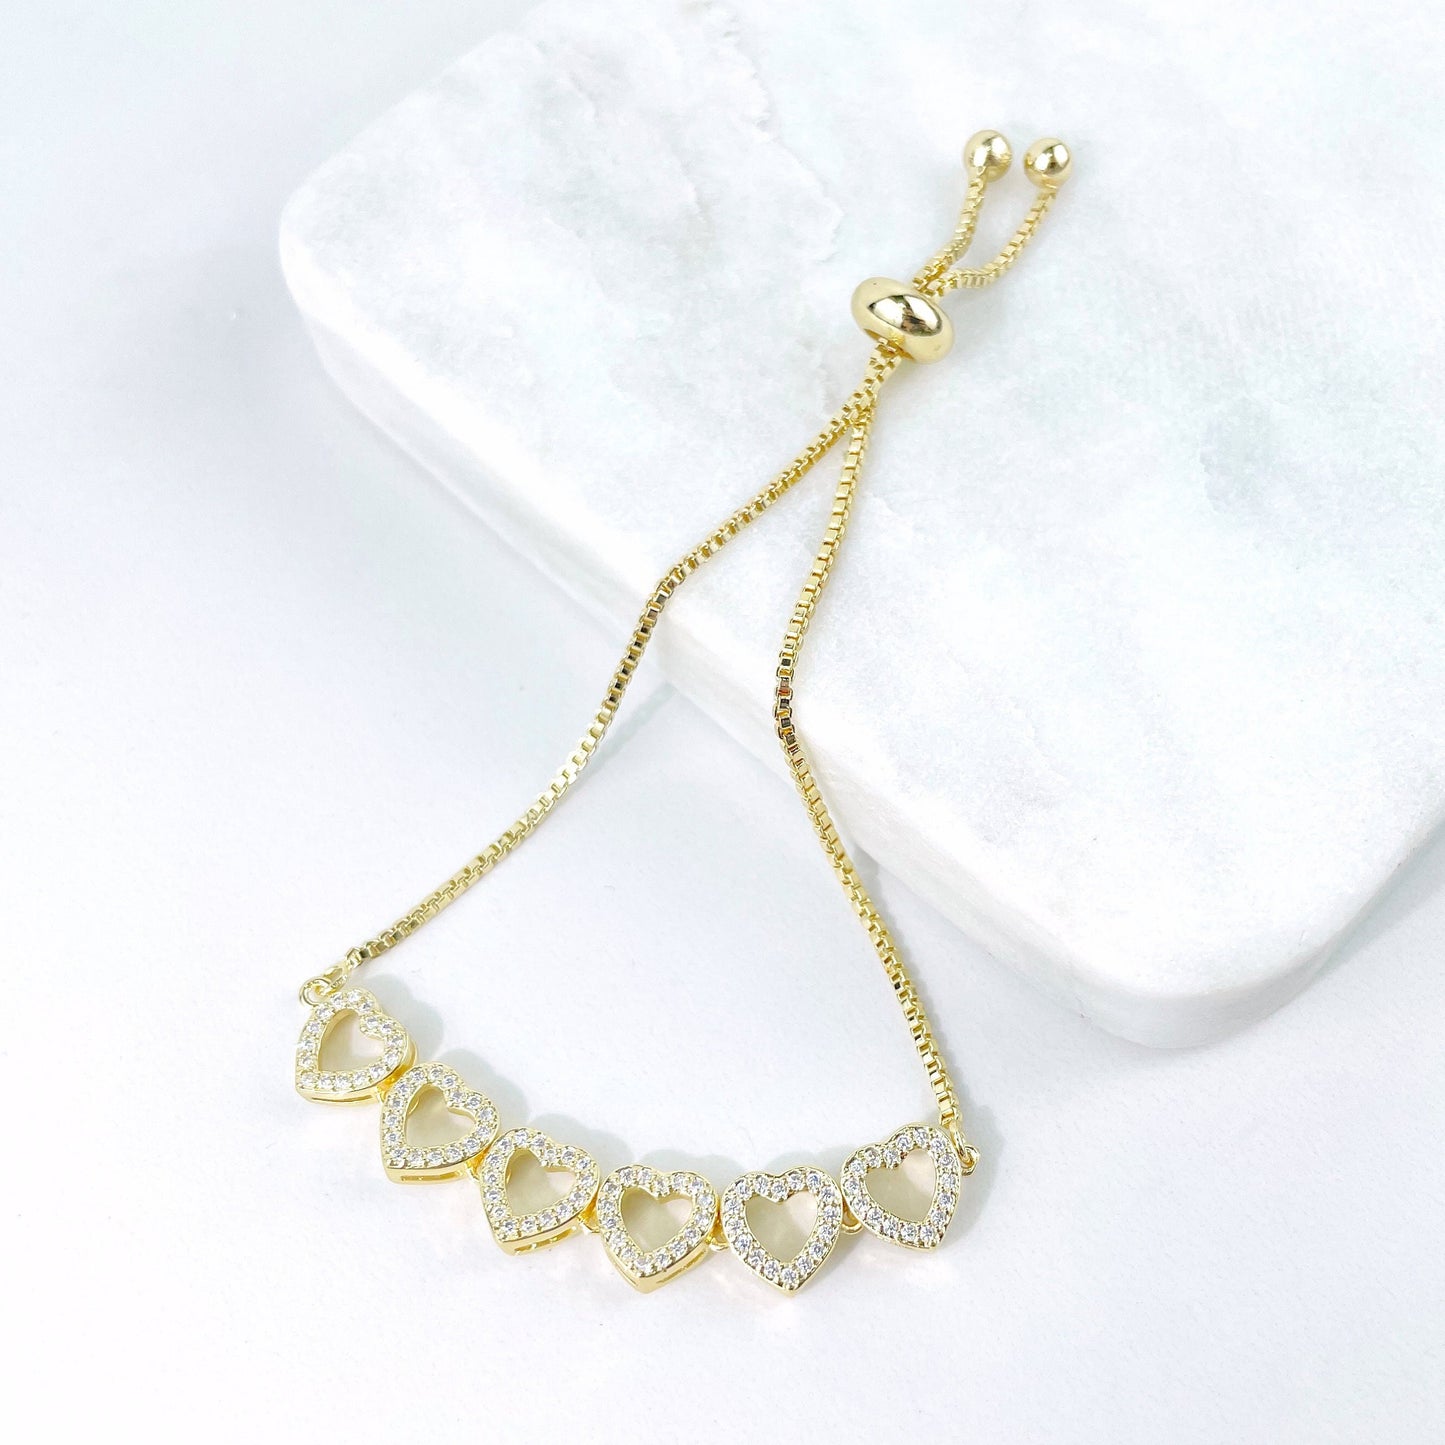 18k Gold Filled 1mm Box Chain, Micro Pave, Cubic Zirconia, Hearts Charms, Adjustable Bracelet, Wholesale Jewelry Supplies